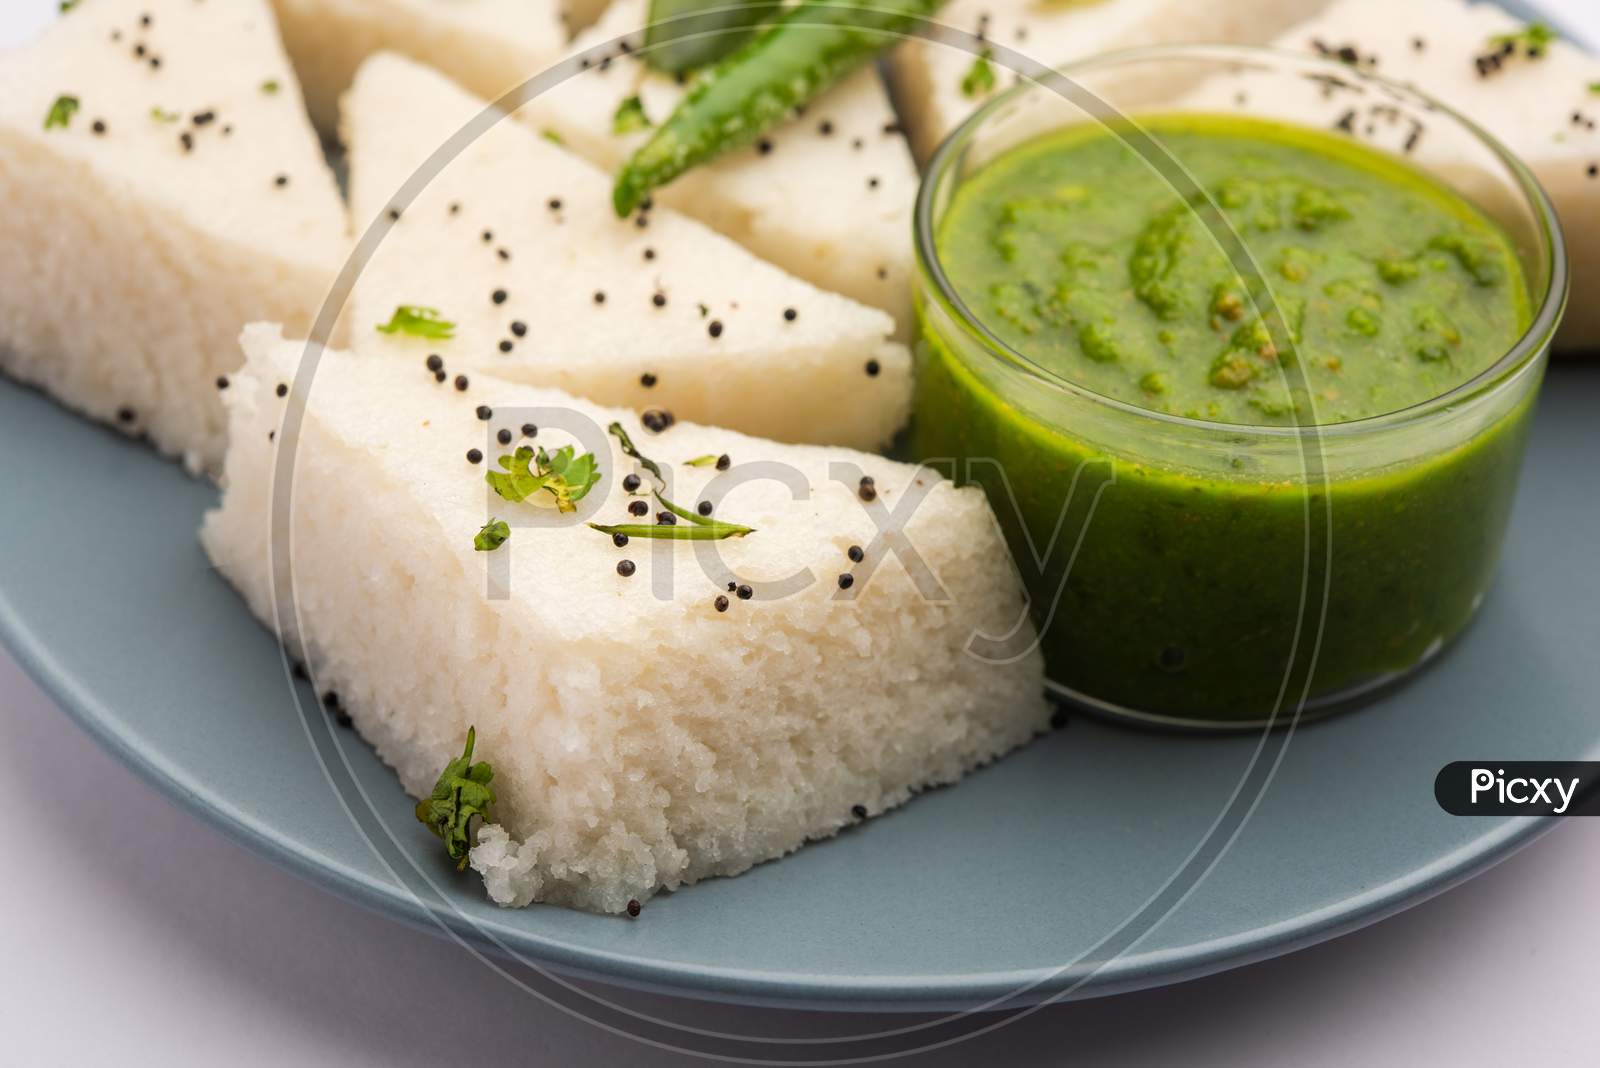 Khaman White Dhokla Made Up Of Rice Or Urad Dal Is A Popular Breakfast Or Snacks Recipe From Gujrat, India, Served With Green Chutney And Hot Tea. Selective Focus